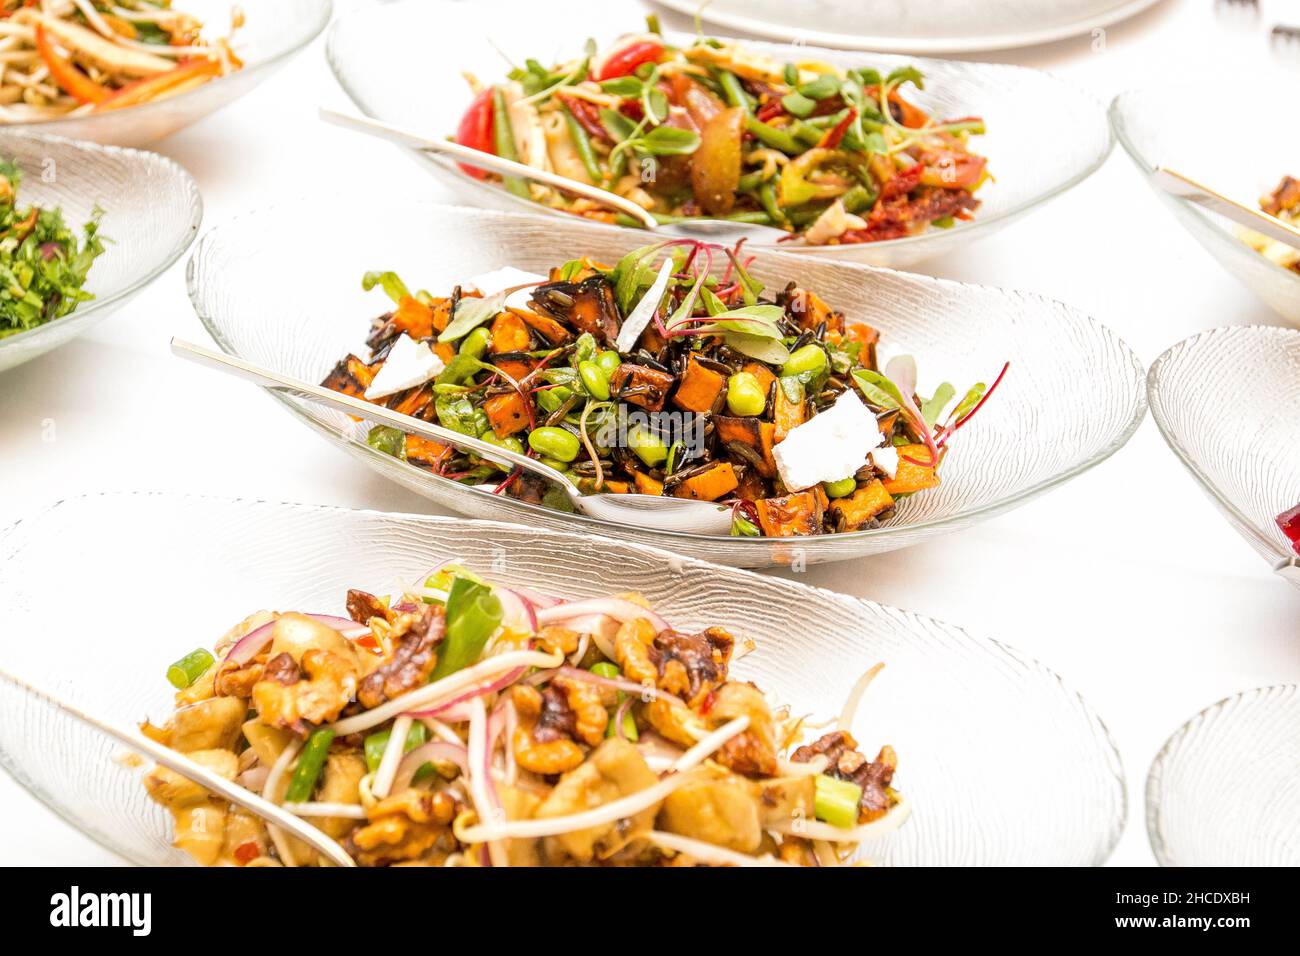 Salad bowls on a buffet table Stock Photo